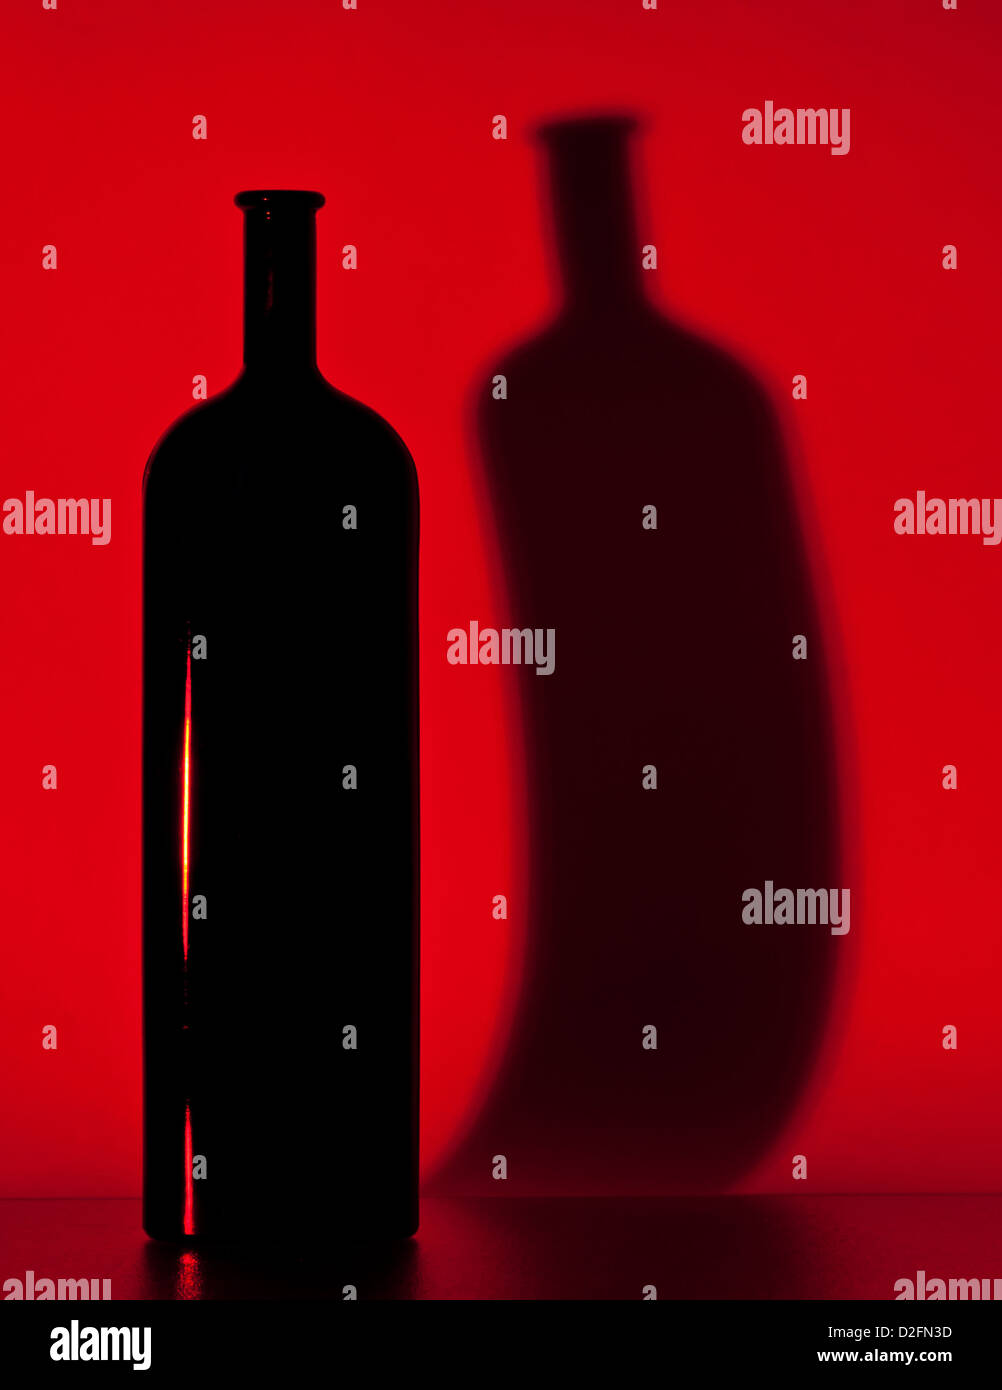 black bottle and its shadow on a red background Stock Photo